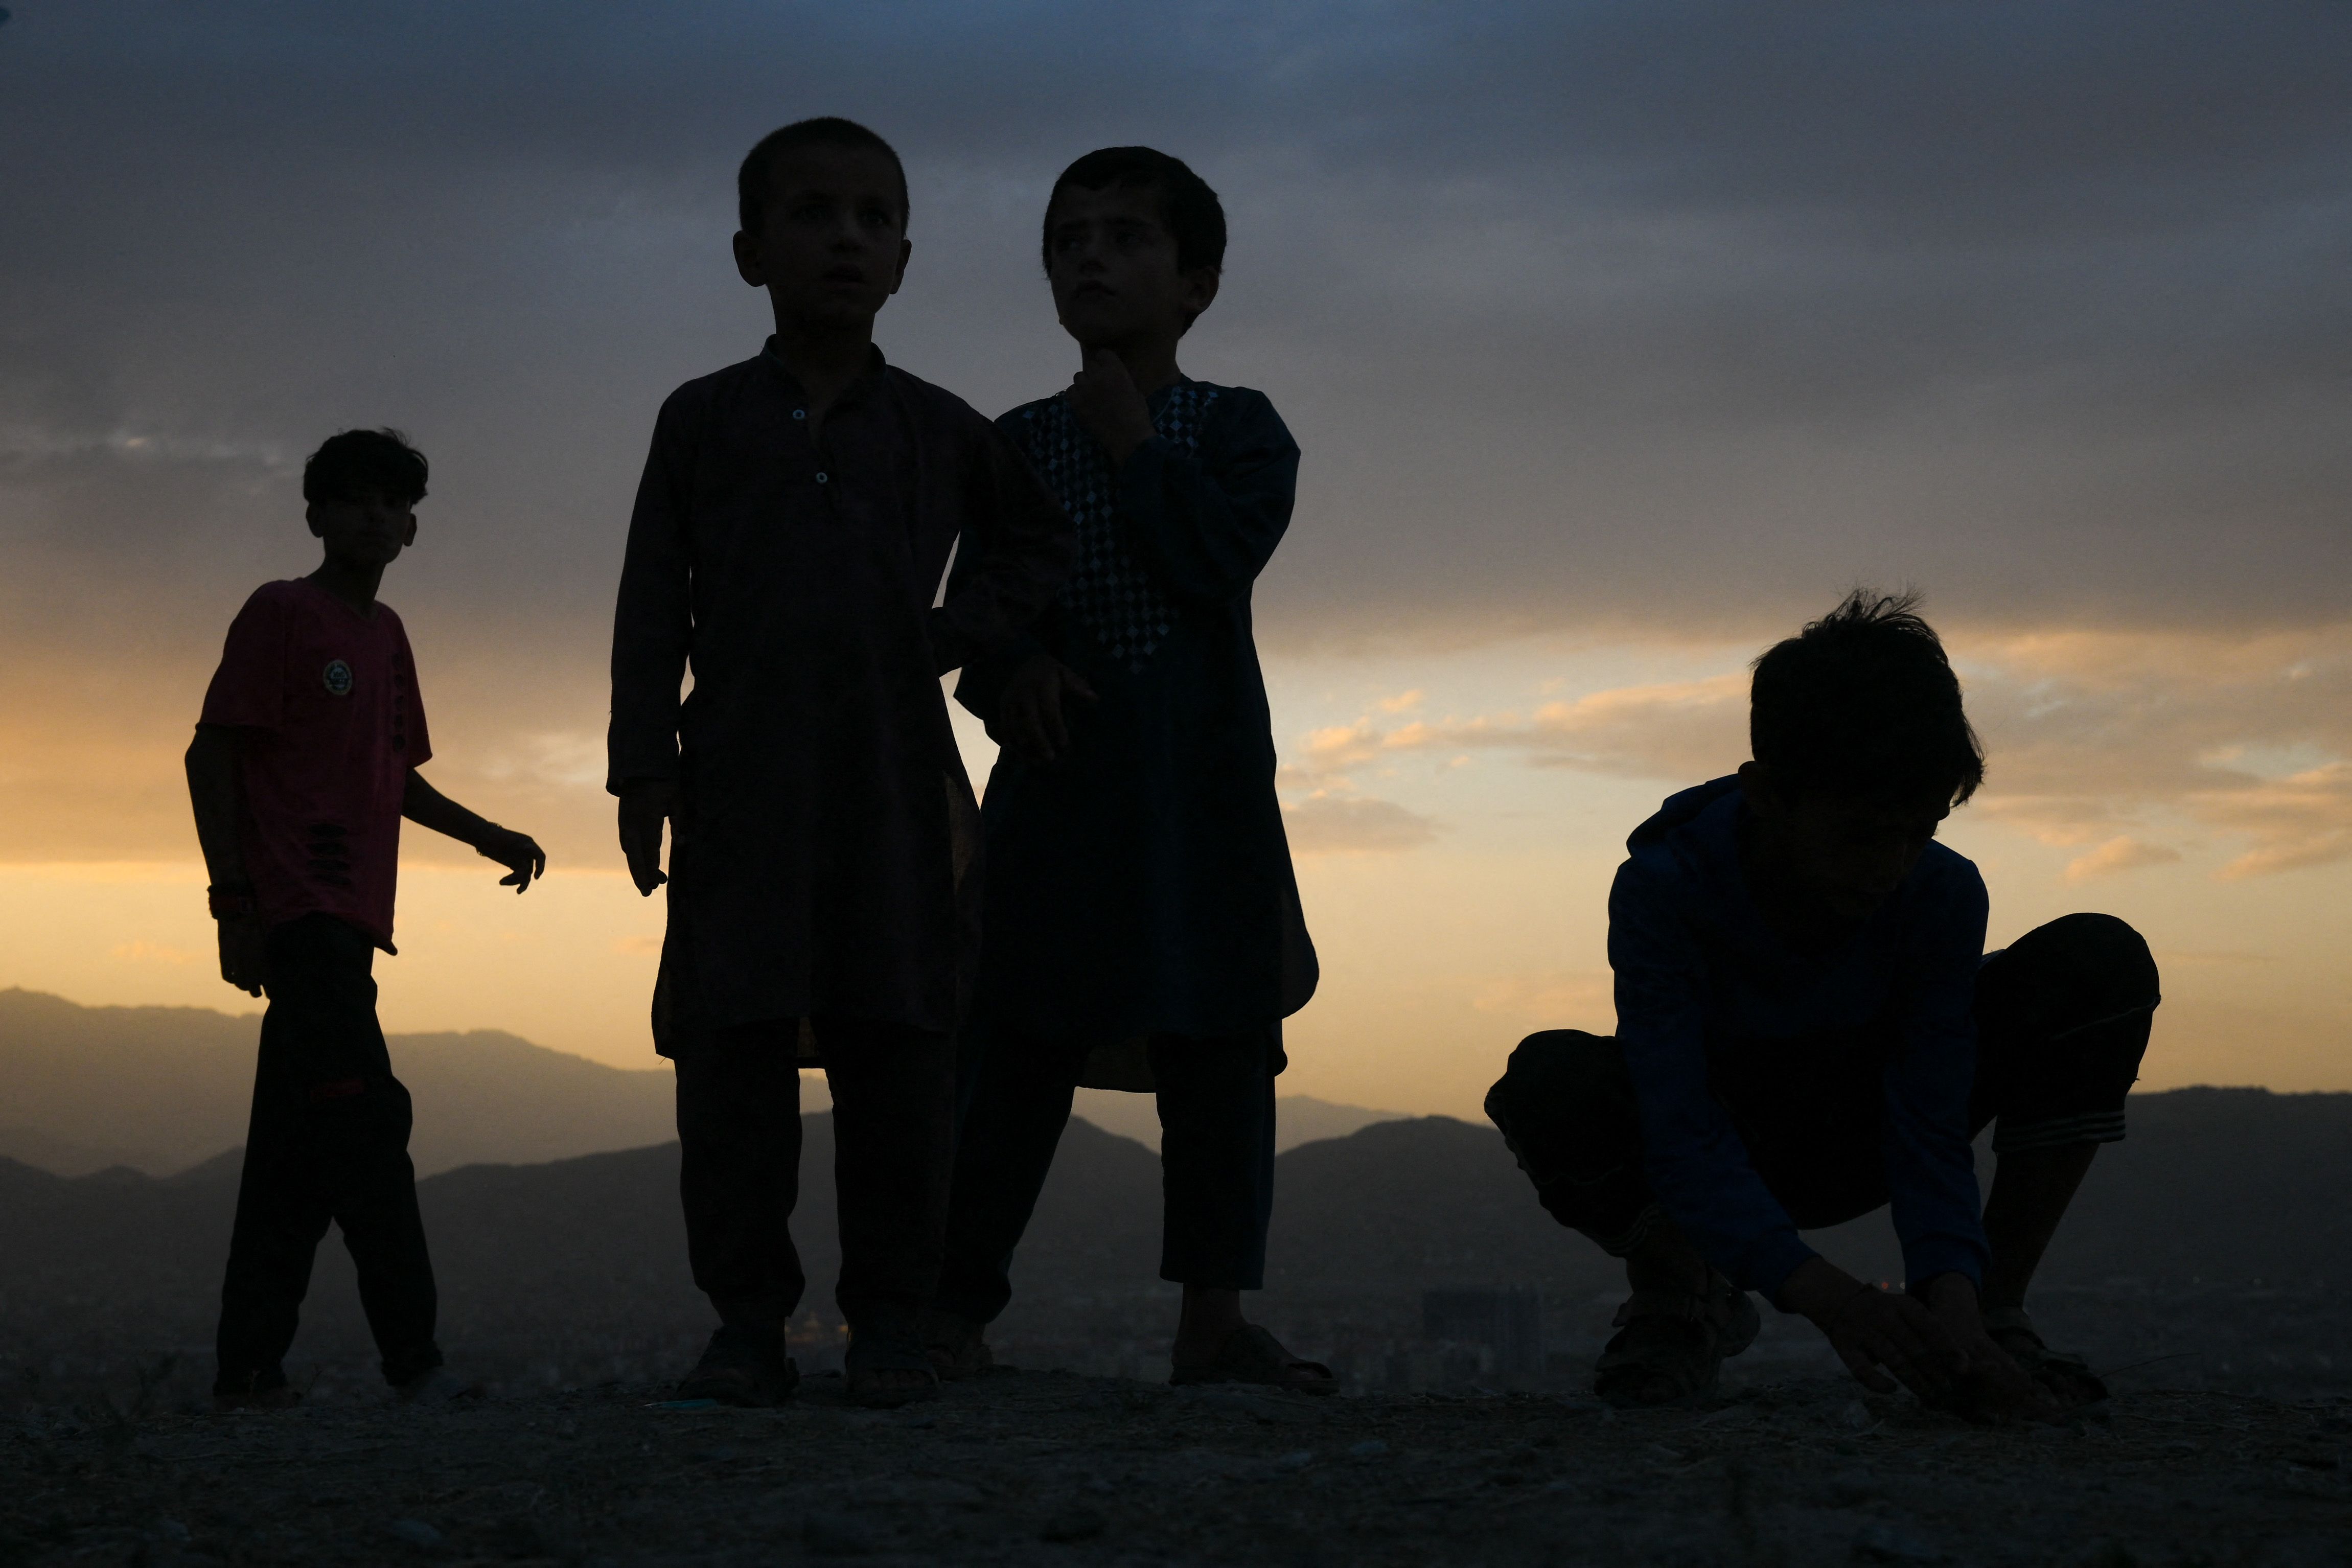 Boys playing marbles at sunset. 